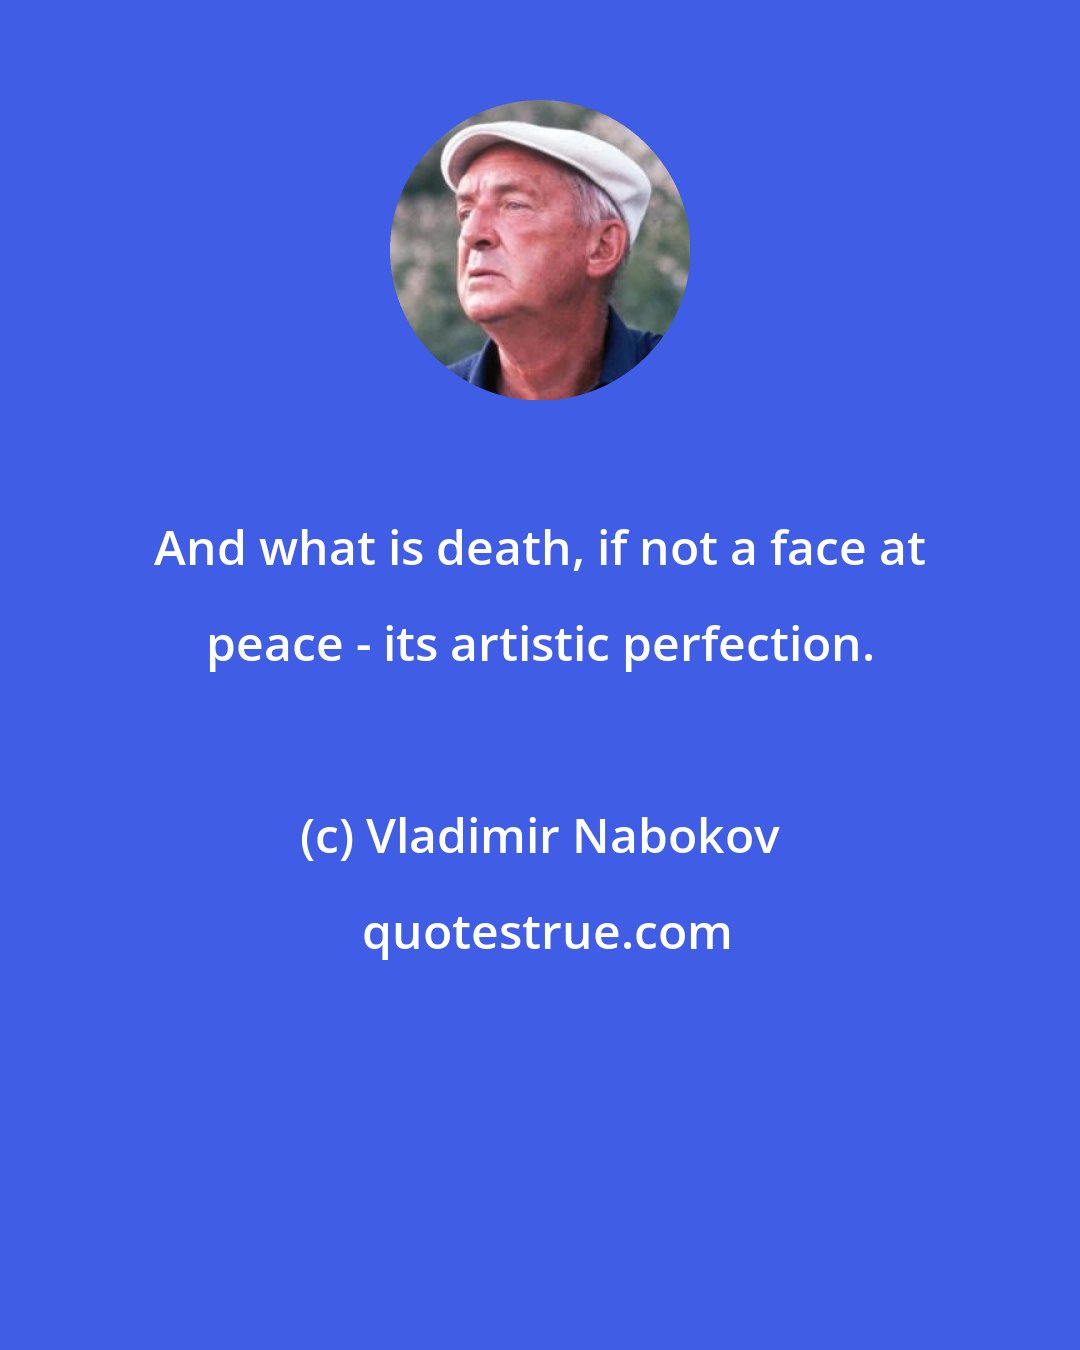 Vladimir Nabokov: And what is death, if not a face at peace - its artistic perfection.